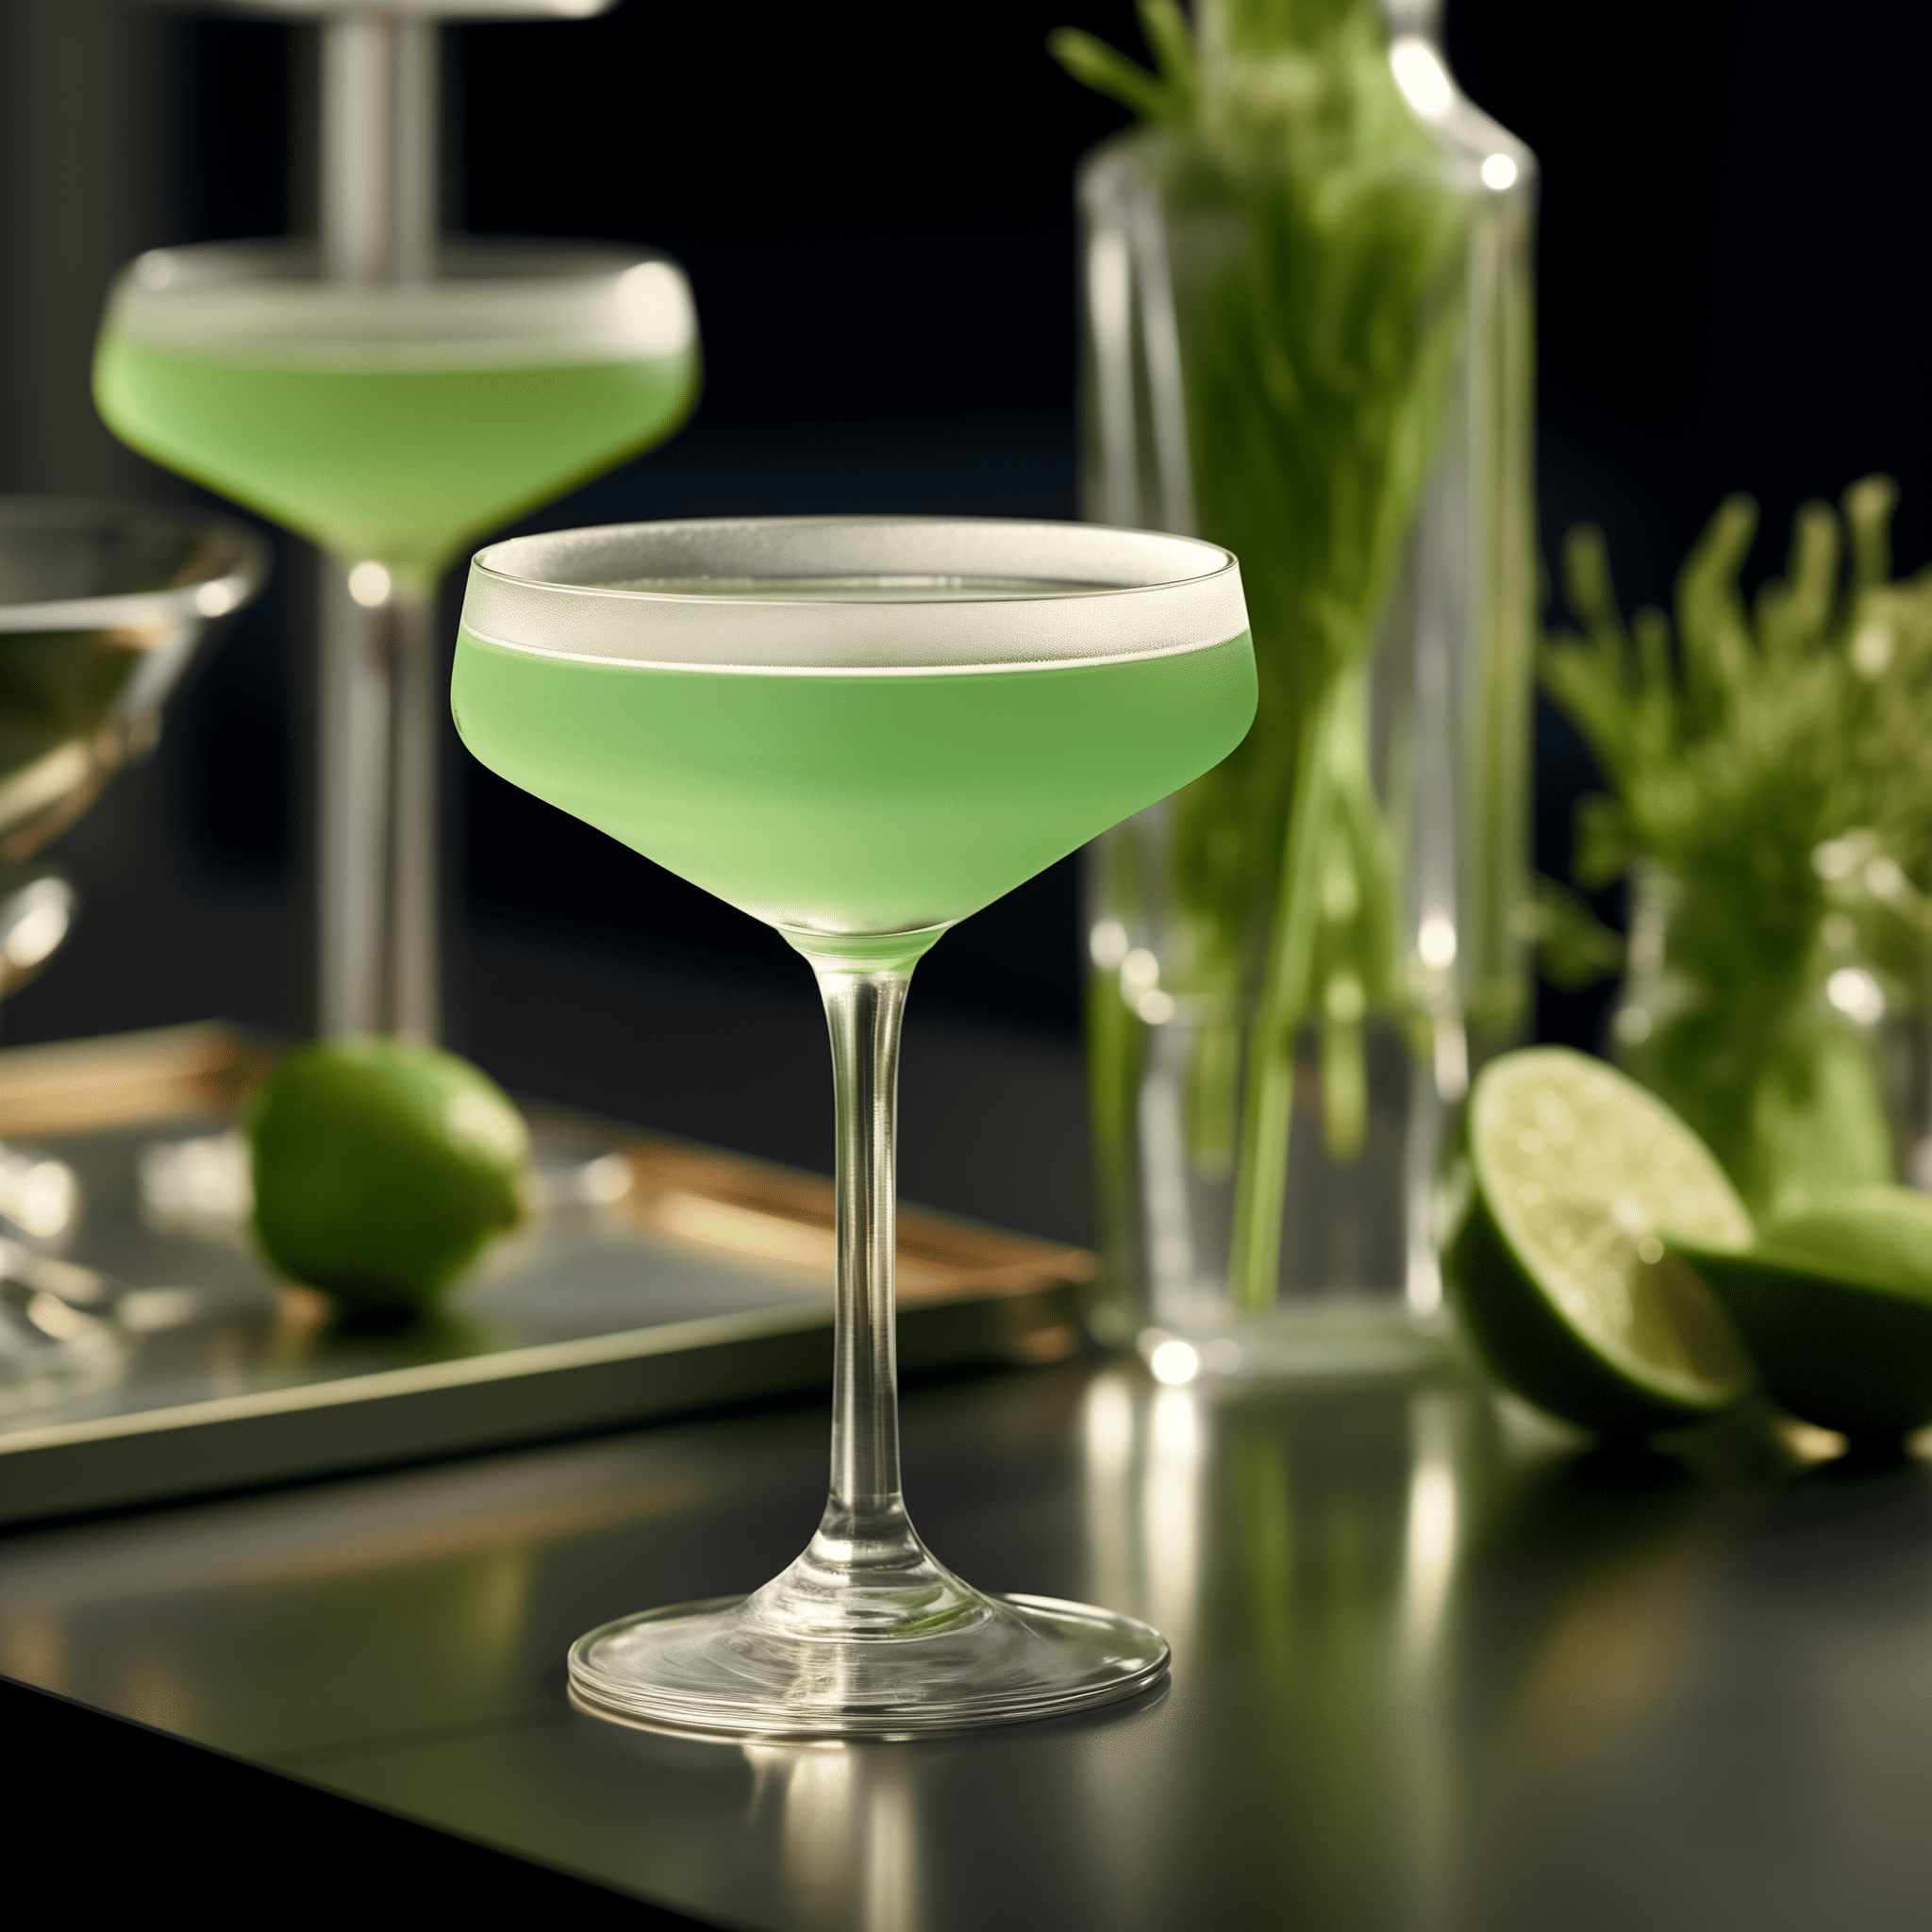 Lumiere Cocktail Recipe - The Lumiere cocktail offers a harmonious balance of flavors. It's herbaceous and floral, with a bright citrus tang from the lime juice and a subtle sweetness from the St Germain. The green Chartreuse provides a complex, spicy undertone, and the gin's botanicals shine through, making it a refreshing yet potent drink.